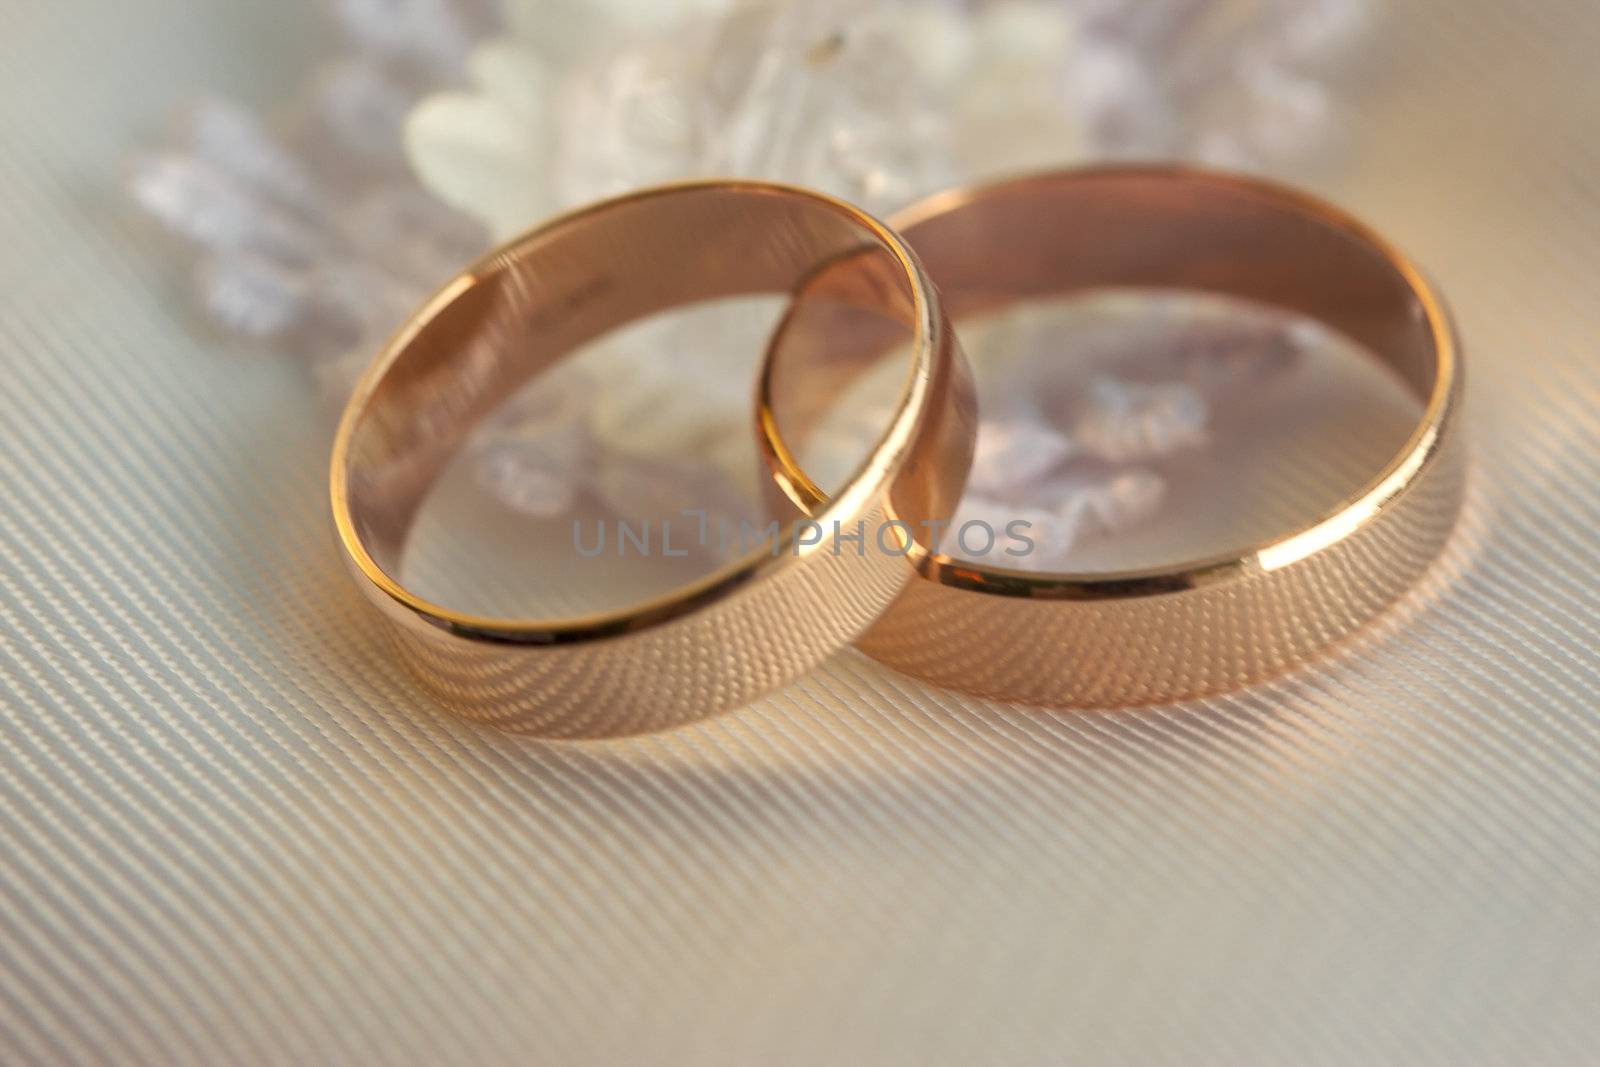 Two wedding rings lie on a white pillow